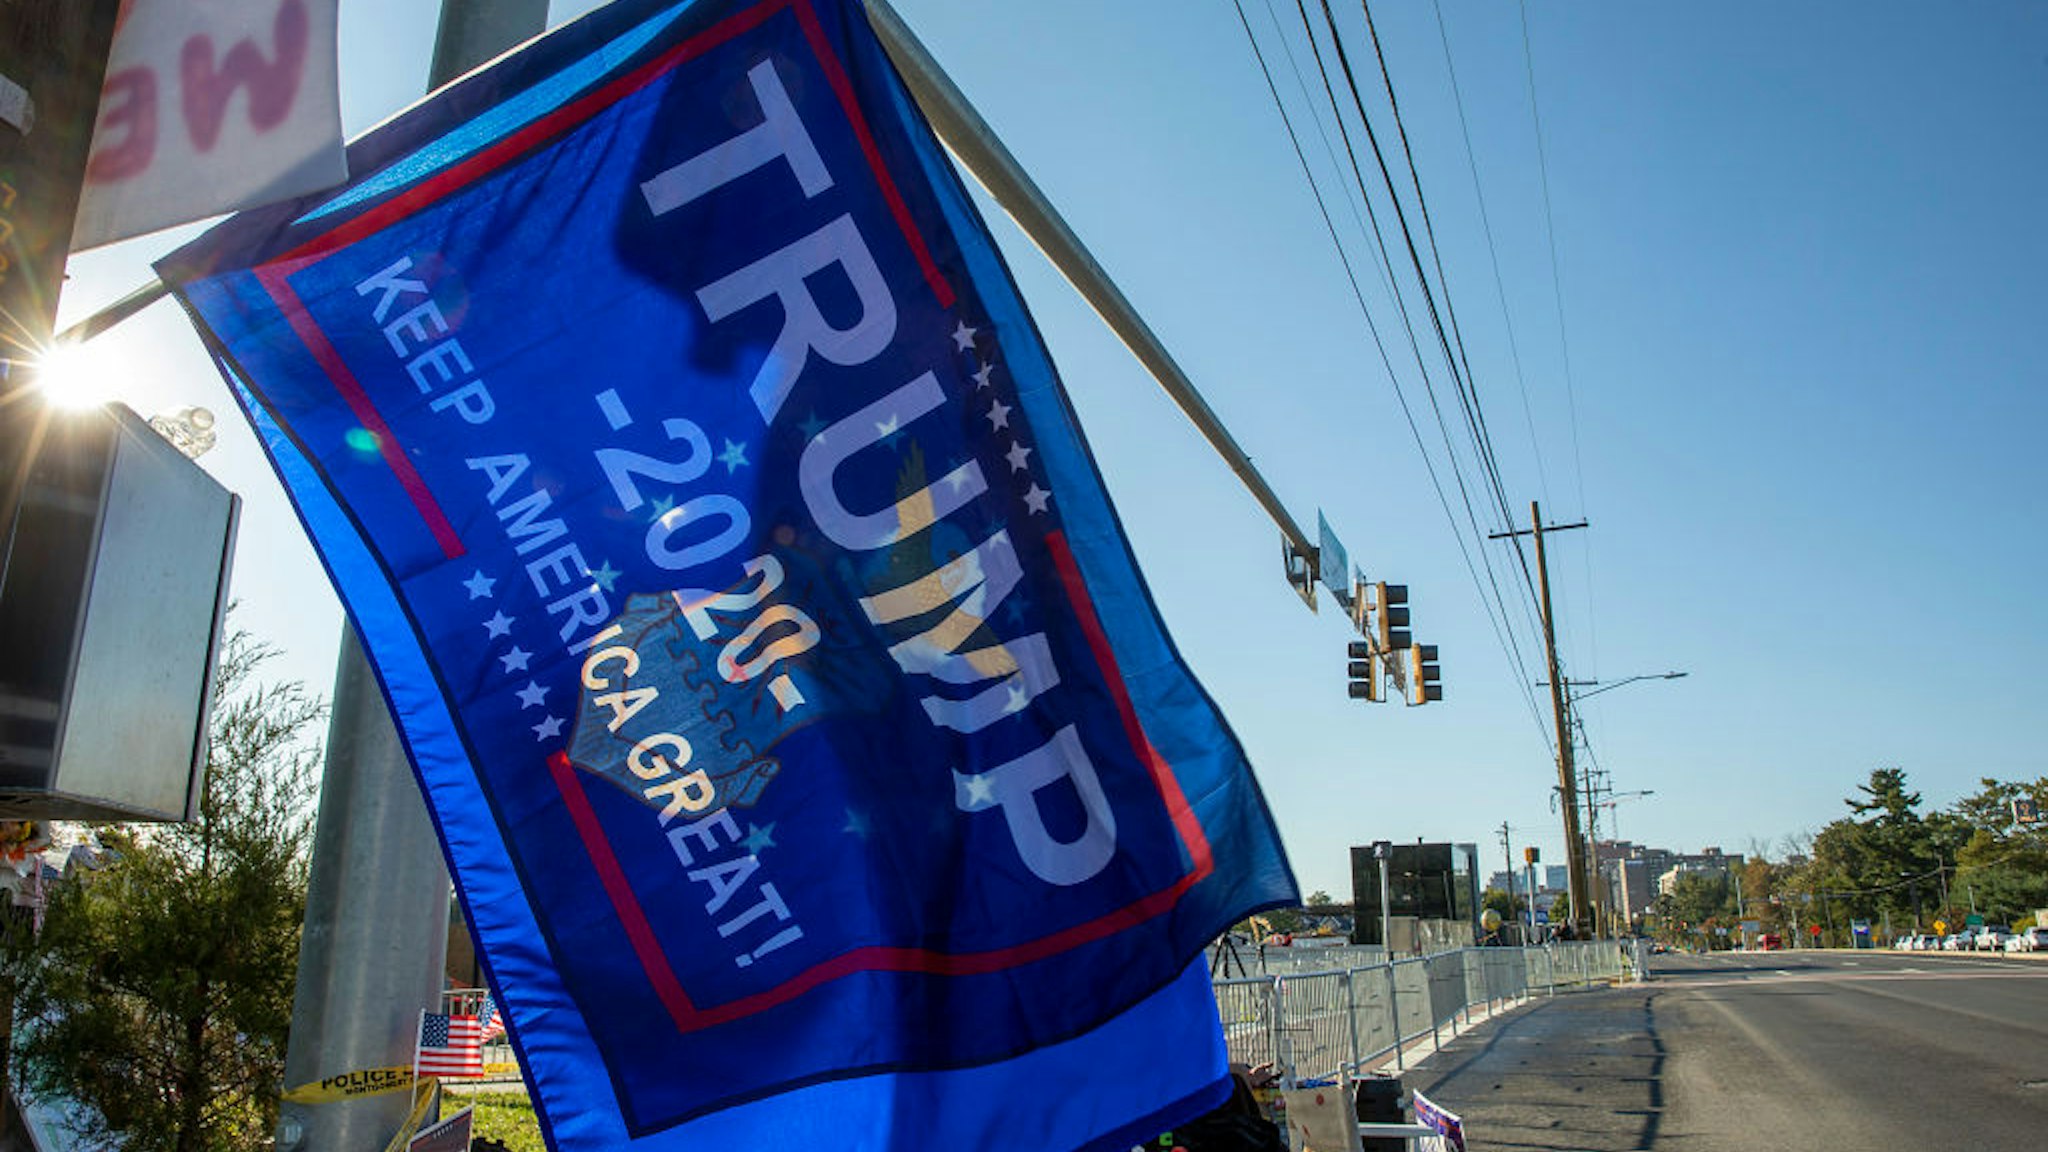 Supporters of President Donald Trump fly a banner outside Walter Reed National Military Medical Center after the President was admitted for treatment of COVID-19 on October 5, 2020 in Bethesda, Maryland.